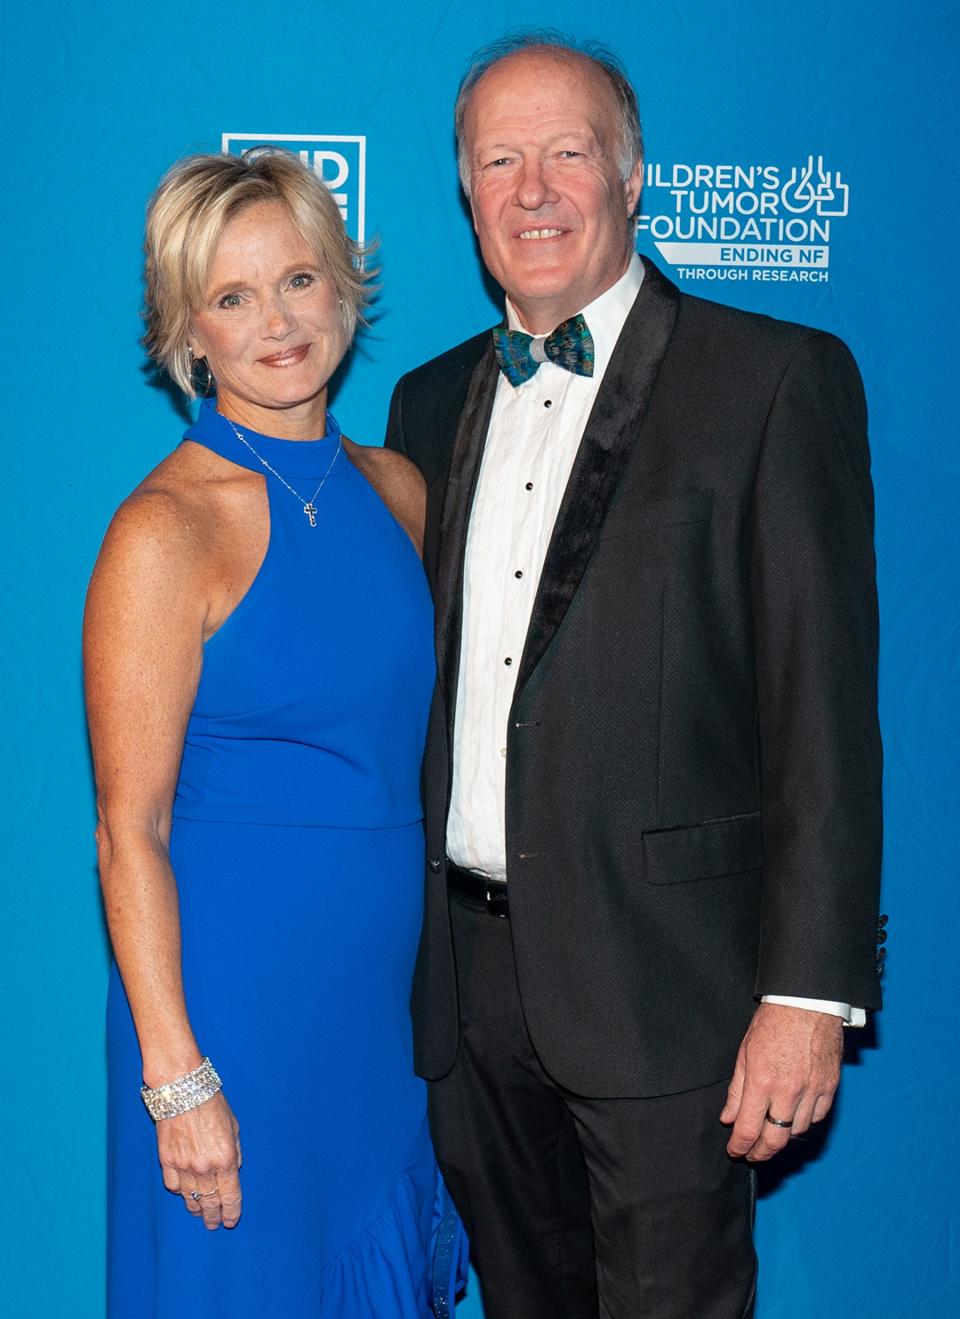 Michele Holbrook and her husband, John Holbrook, who live in Fernandina Beach, attend the 2022 Children's Tumor Foundation gala. Diagnosed with a tumor condition at age 30, she is an ambassador for the foundation.